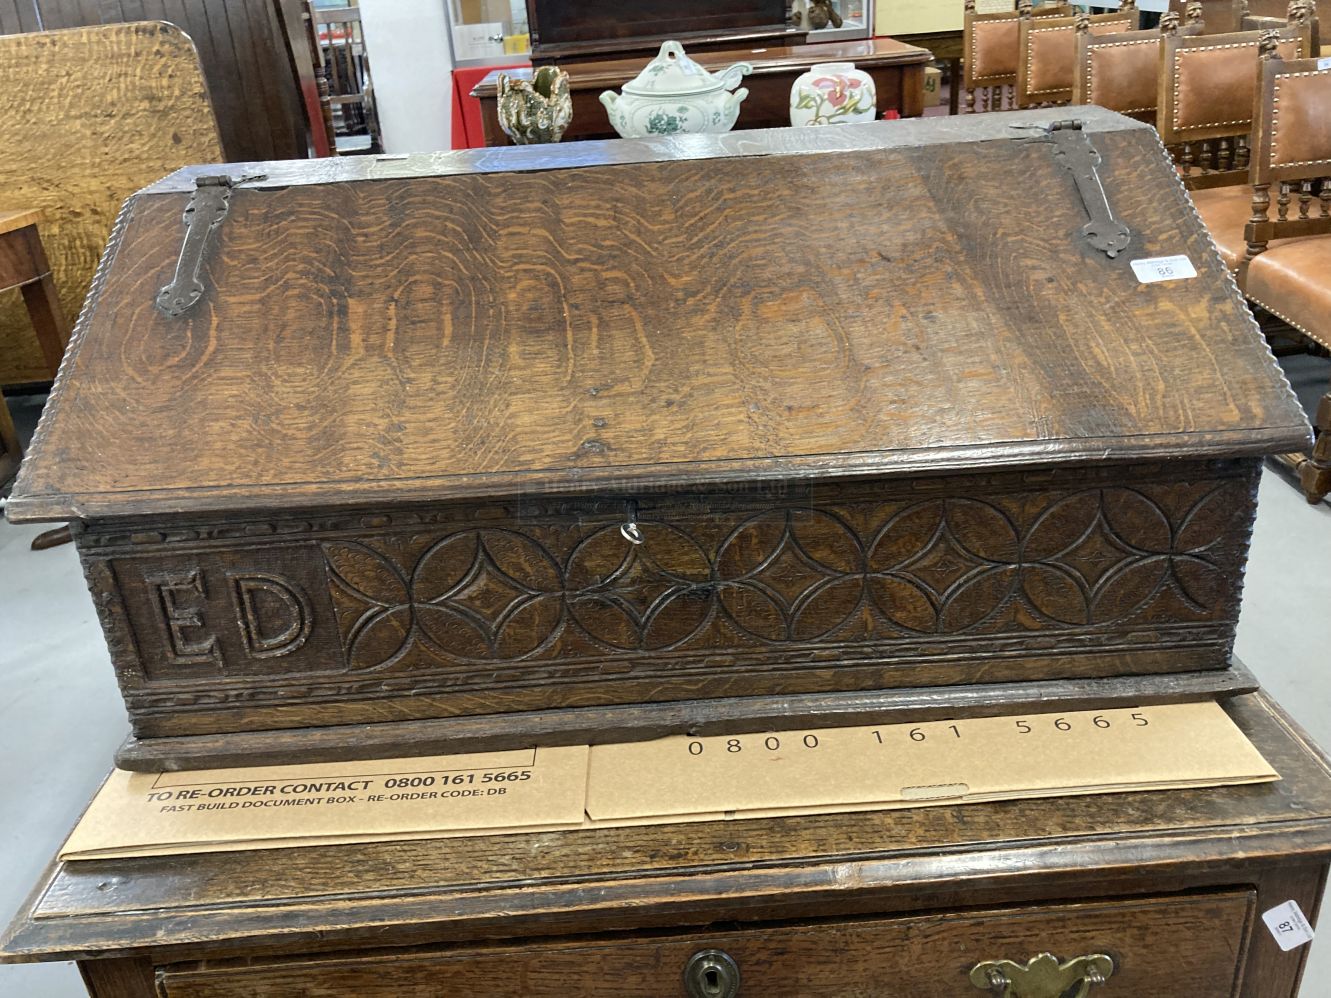 18th cent. Oak Bible box with later additions, cast iron hinges, chip decoration to sides, and